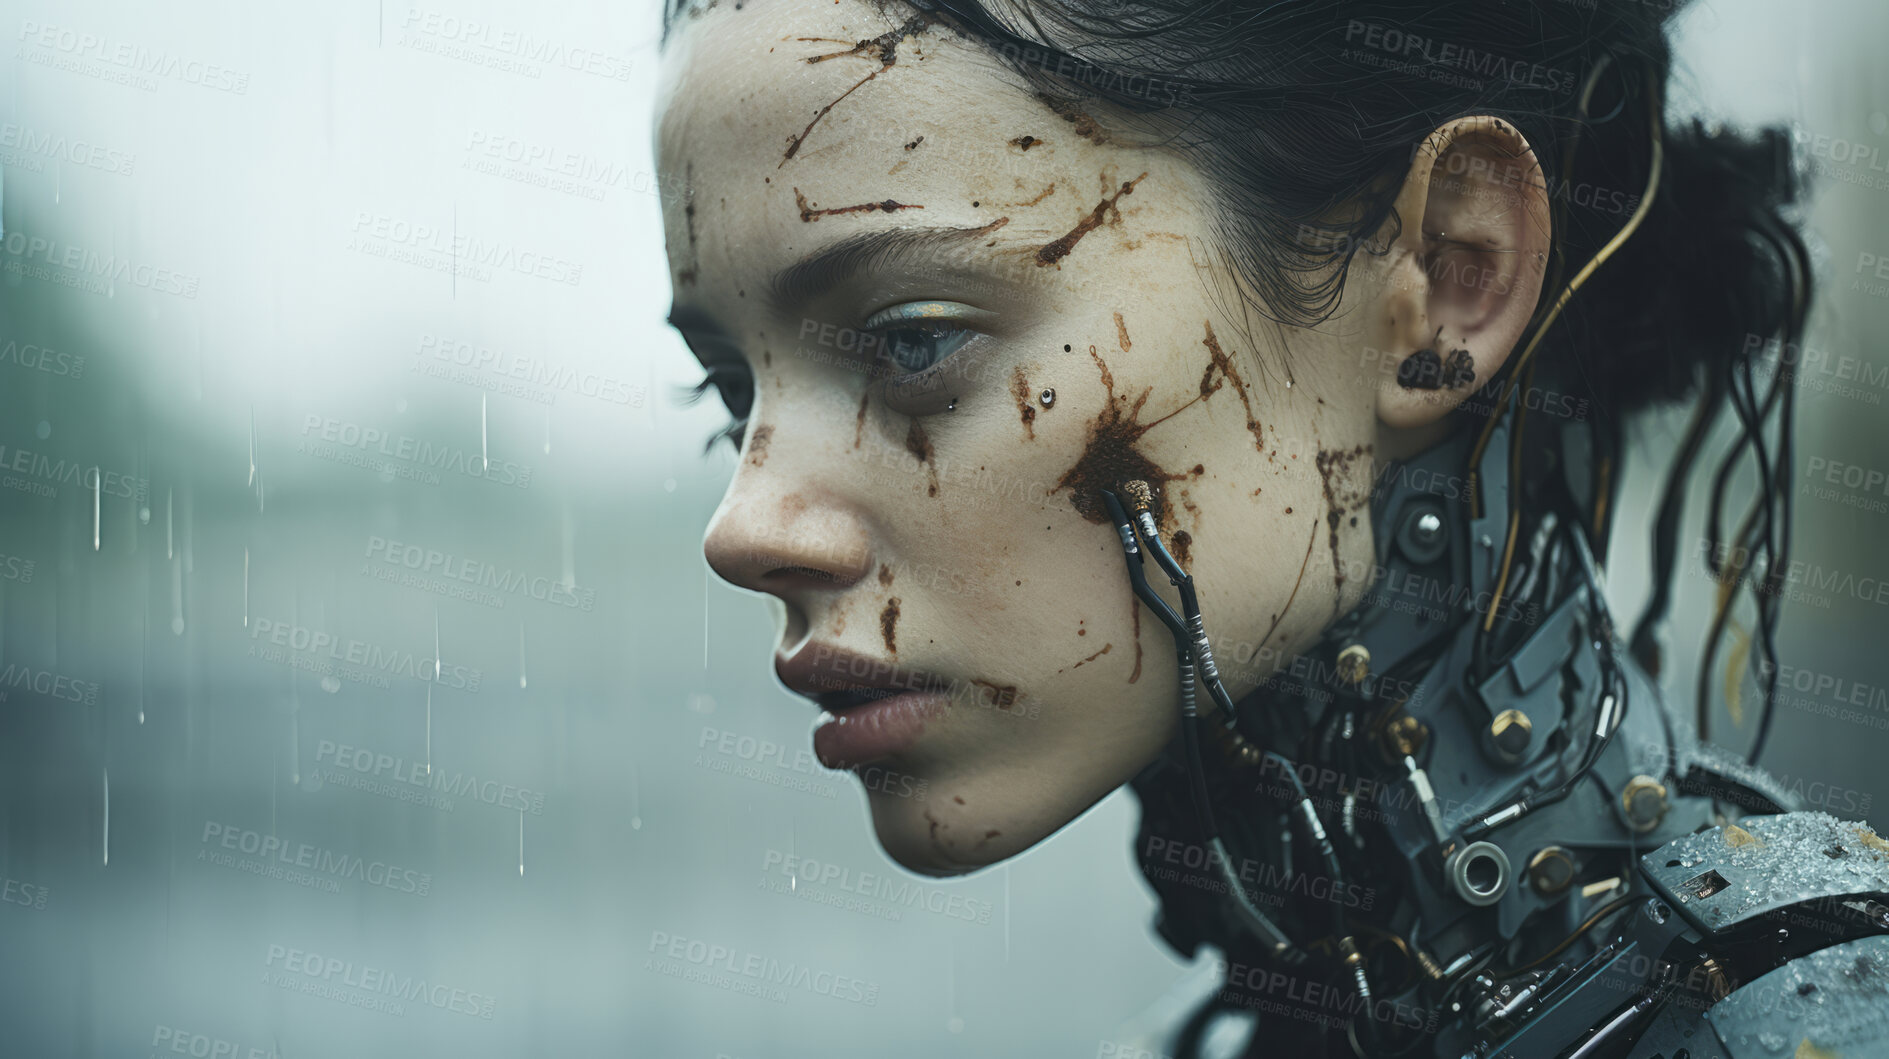 Buy stock photo Close up of futuristic, robotic humanoid. Human face with mechanical body sci-fi cyberpunk dystopia.